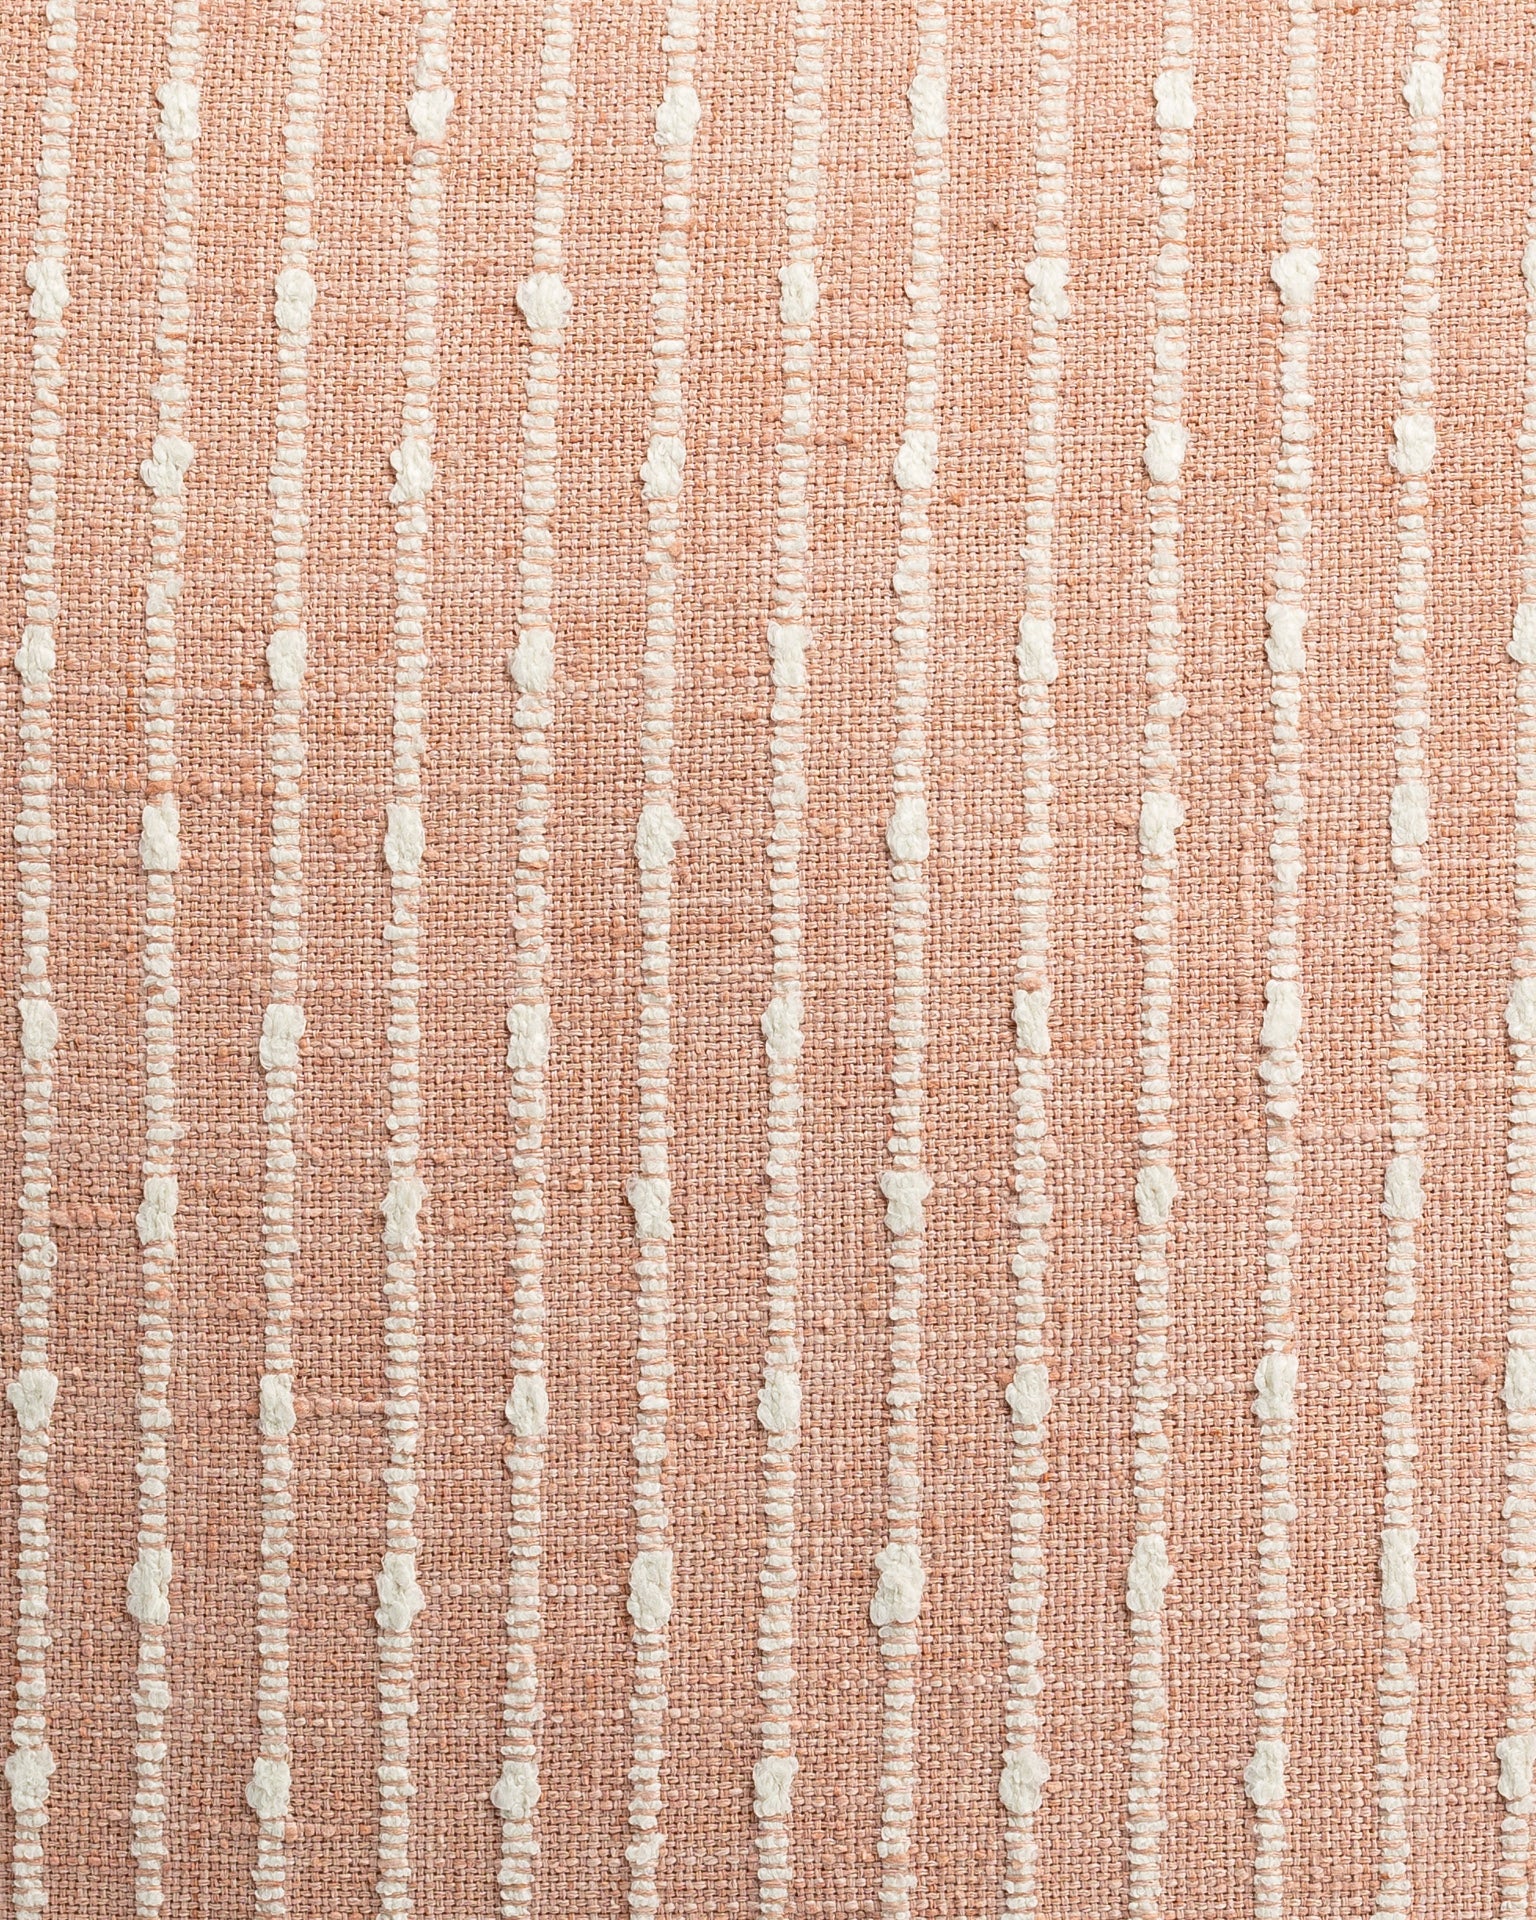 Close-up of a textured fabric with parallel peach-colored stripes and intermittent white tufts, creating a tactile and visually interesting pattern in Gabby's Hopscotch Blush 26x26 style.